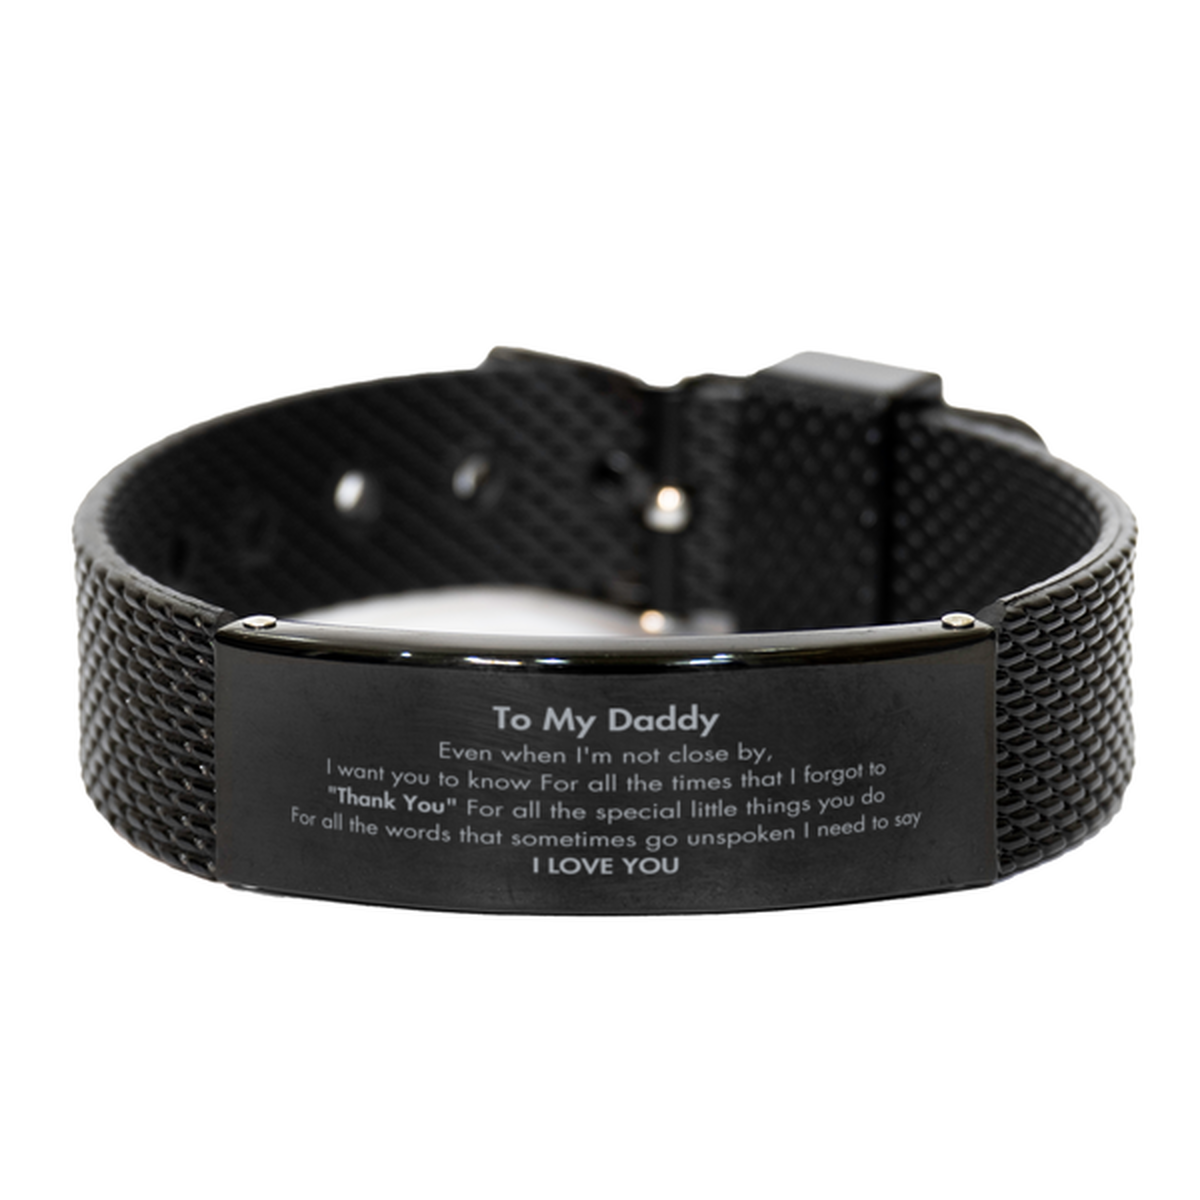 Thank You Gifts for Daddy, Keepsake Black Shark Mesh Bracelet Gifts for Daddy Birthday Mother's day Father's Day Daddy For all the words That sometimes go unspoken I need to say I LOVE YOU